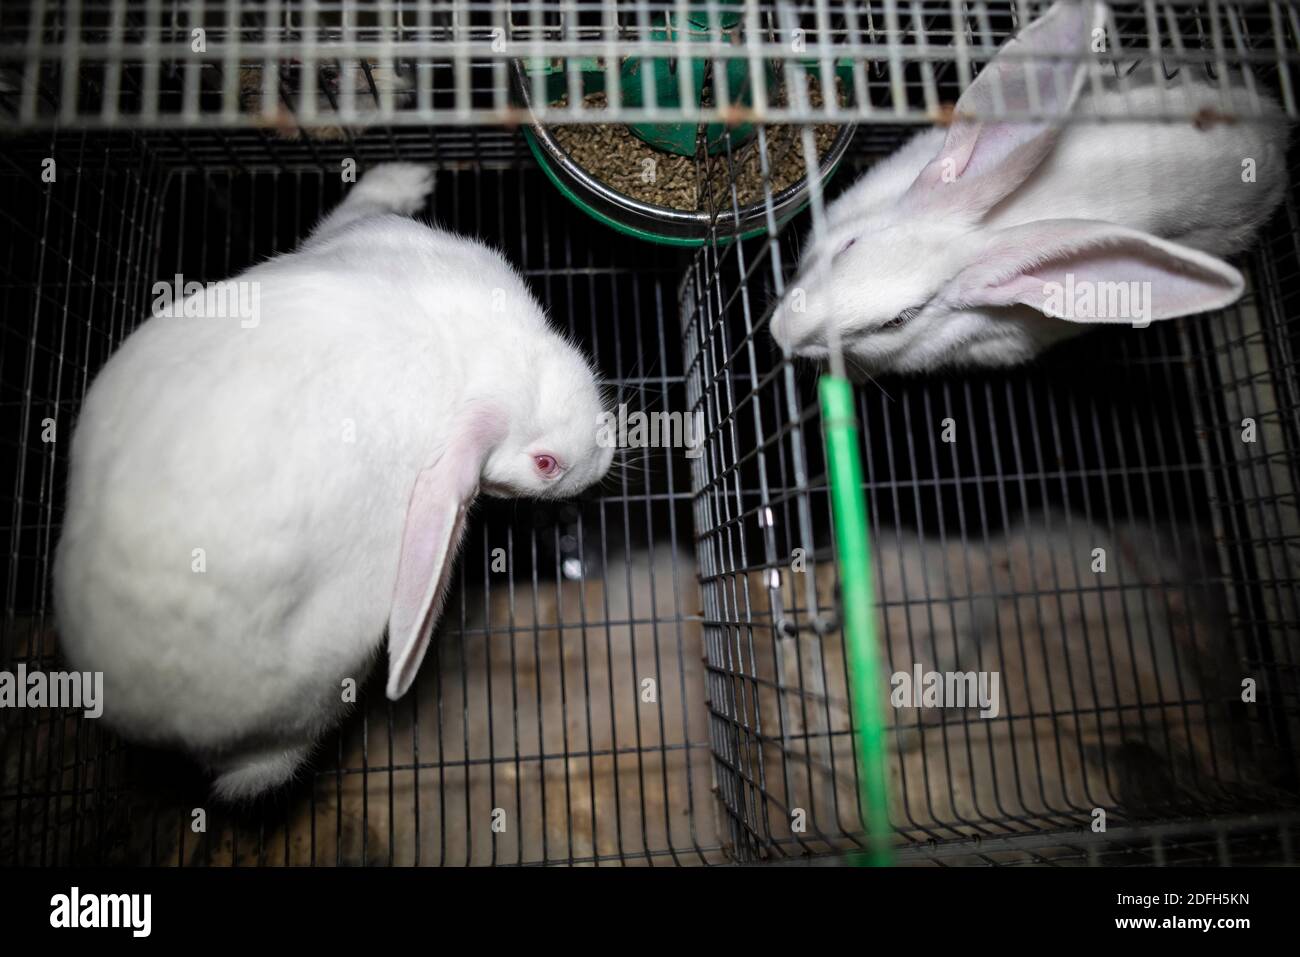 Overcrowded cages, wire mesh floor, high mortalities": the animal rights  association L214 has unveiled, Tuesday evening, September 29, 2020,  "terrible images" of a large intensive rabbit farm located in the town of